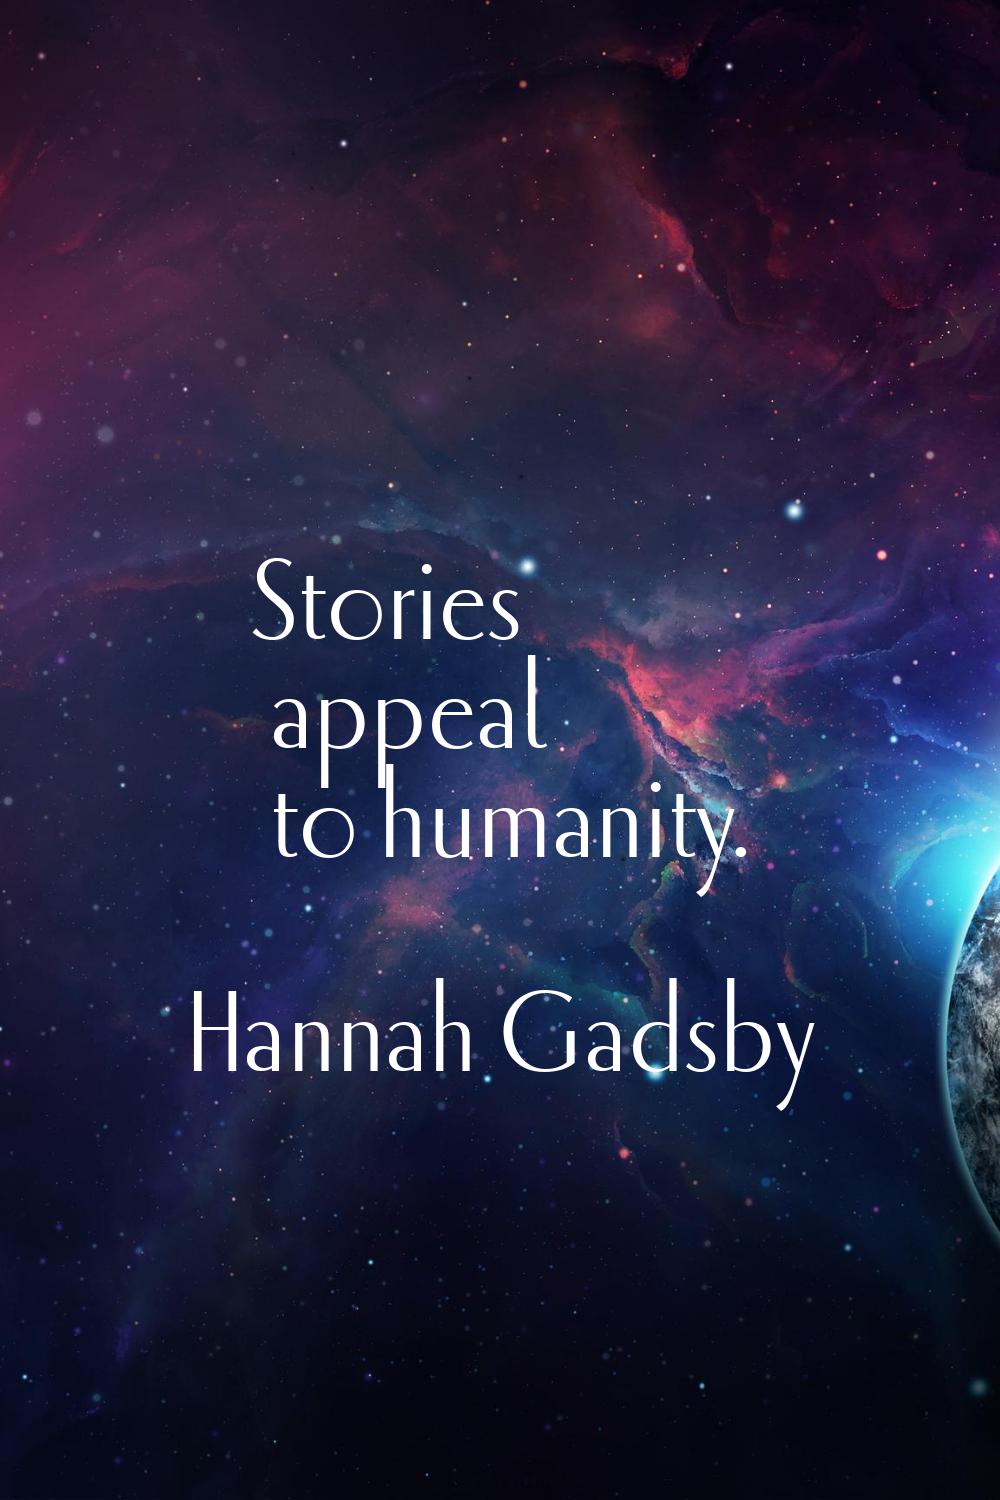 Stories appeal to humanity.